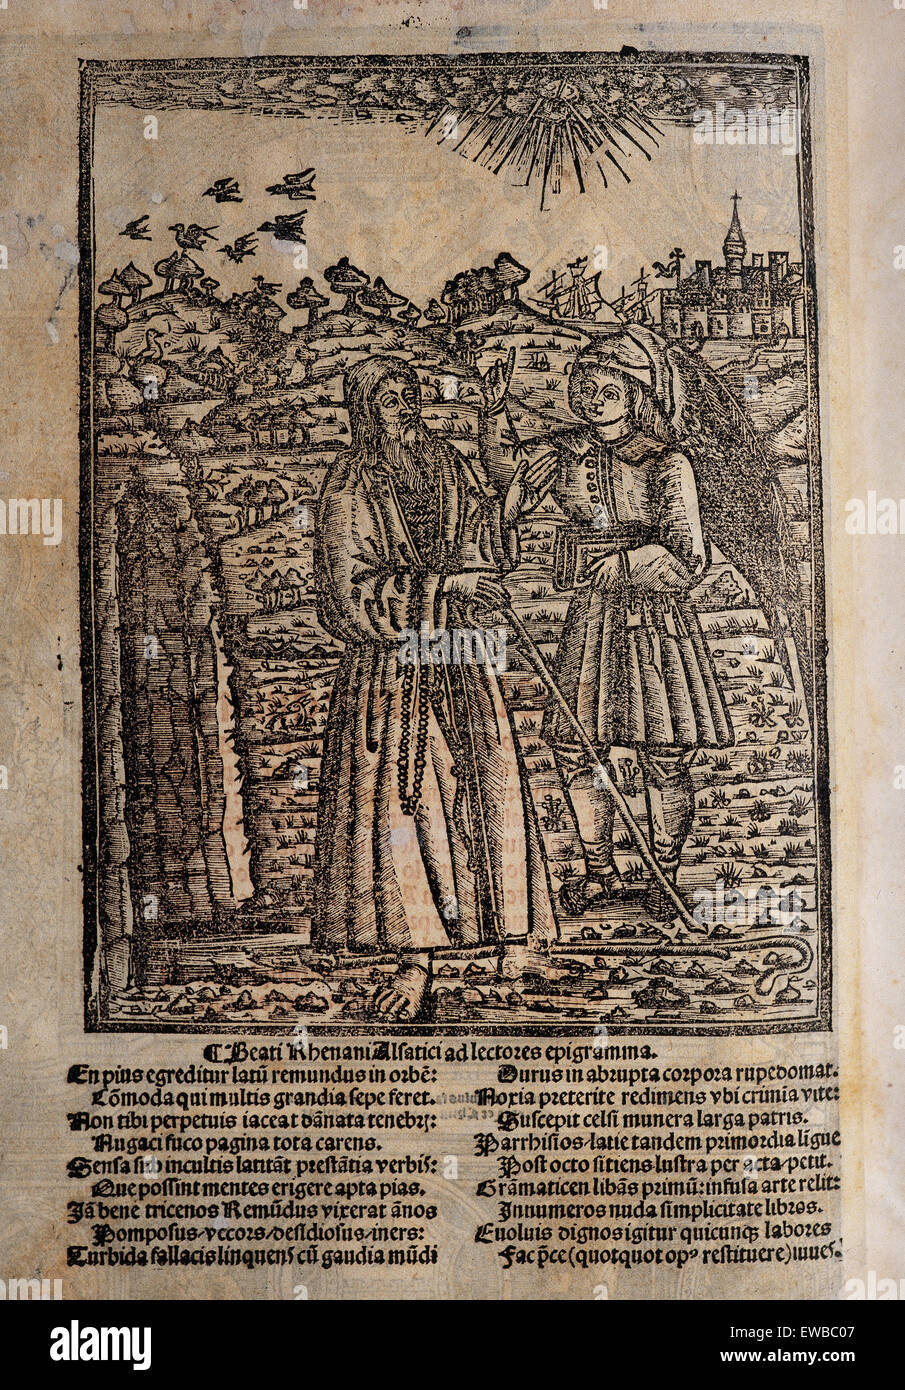 Ramon Llull (1235-1316). Spanish writer and philosopher. Blanquerna, ca. 1293. Engraving of the back cover with Llull and a disciple. Beati Rhenani Alfatici ad lectores epigramma. Folio in Latin. Stock Photo